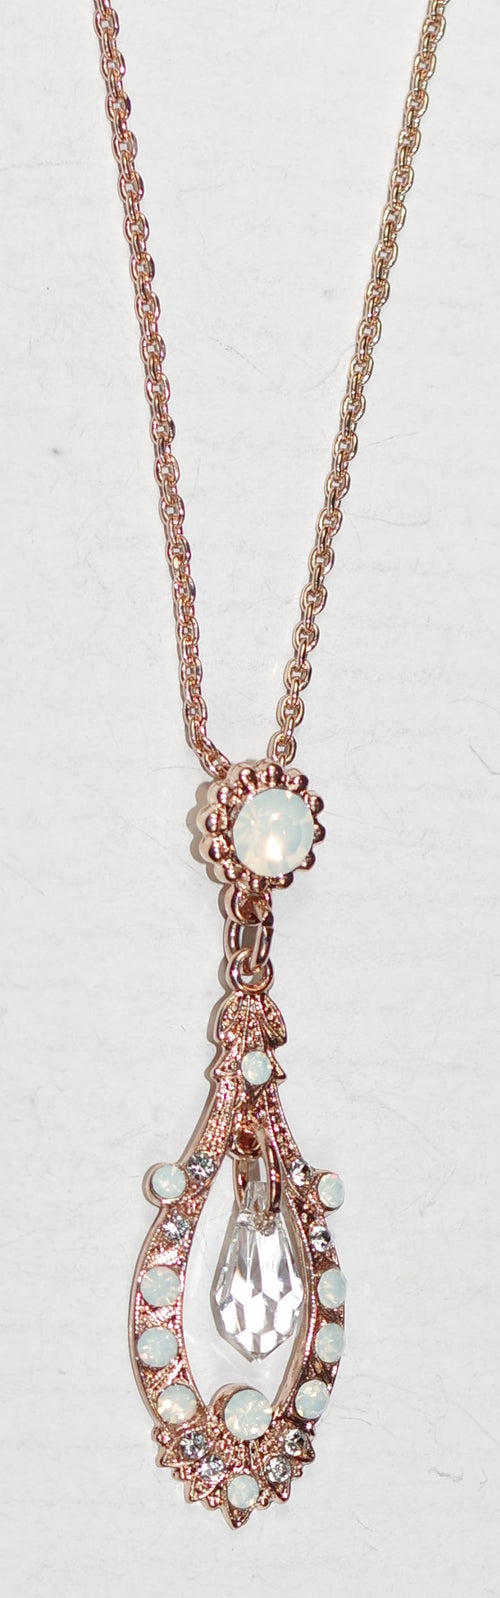 MARIANA PENDANT: clear, white stones in 2" pendant, rose gold setting, 13" adjustable chain